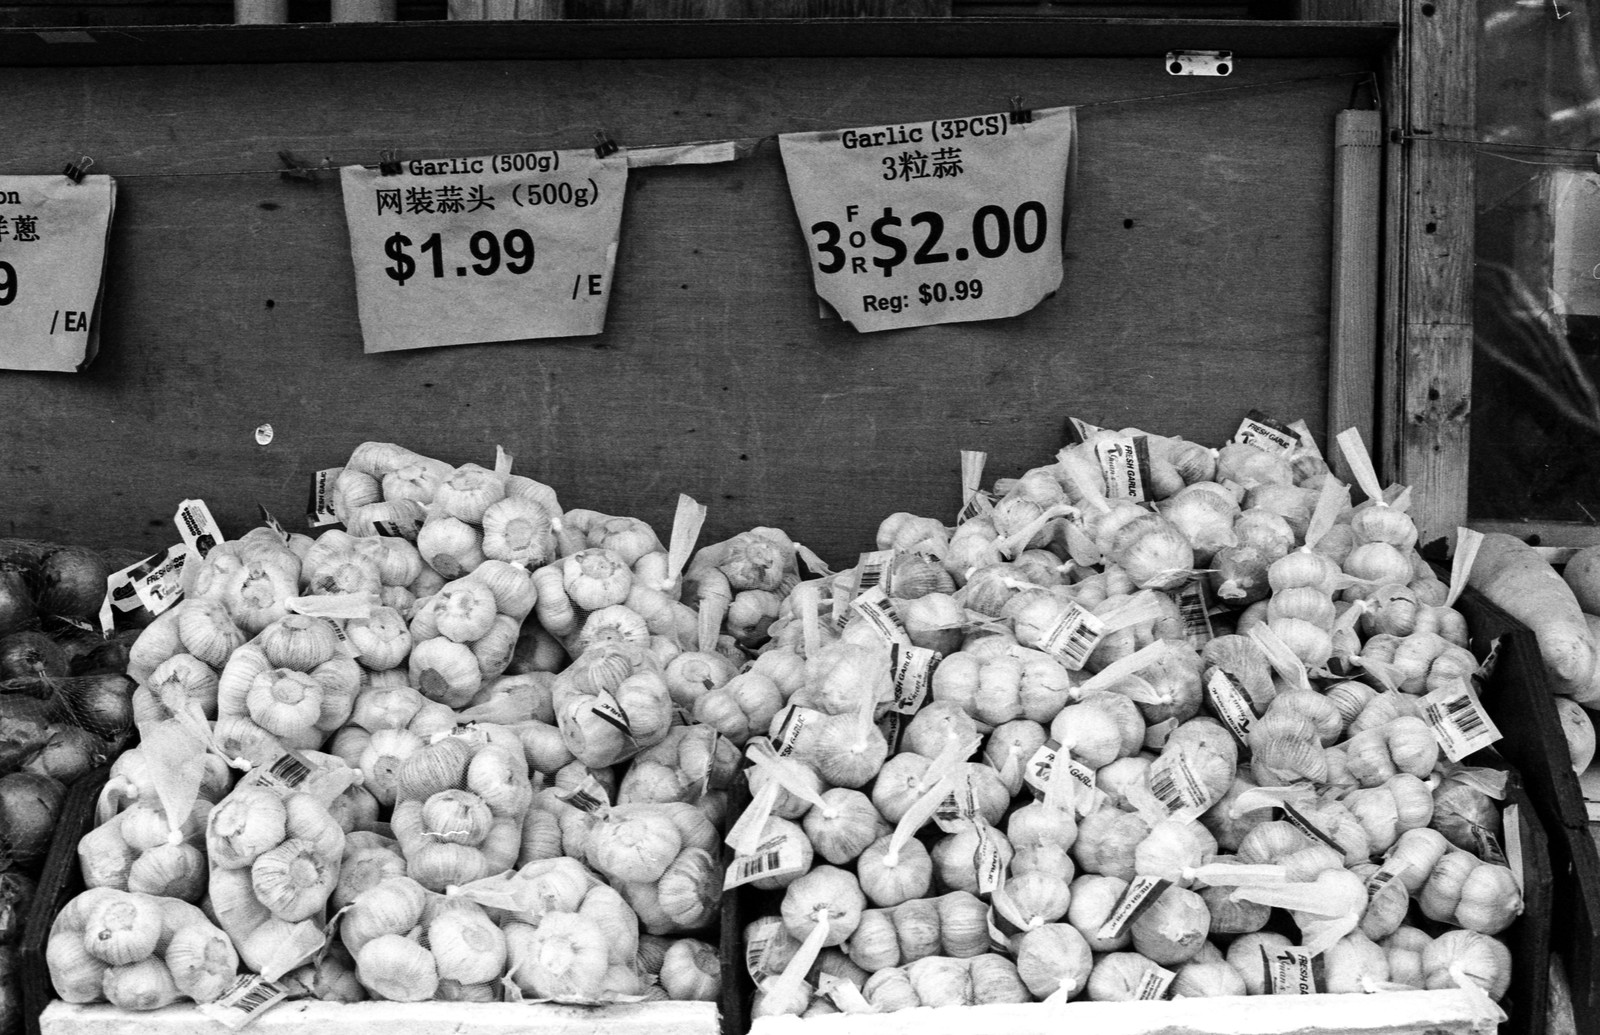 Chinatown East Garlic For Sale